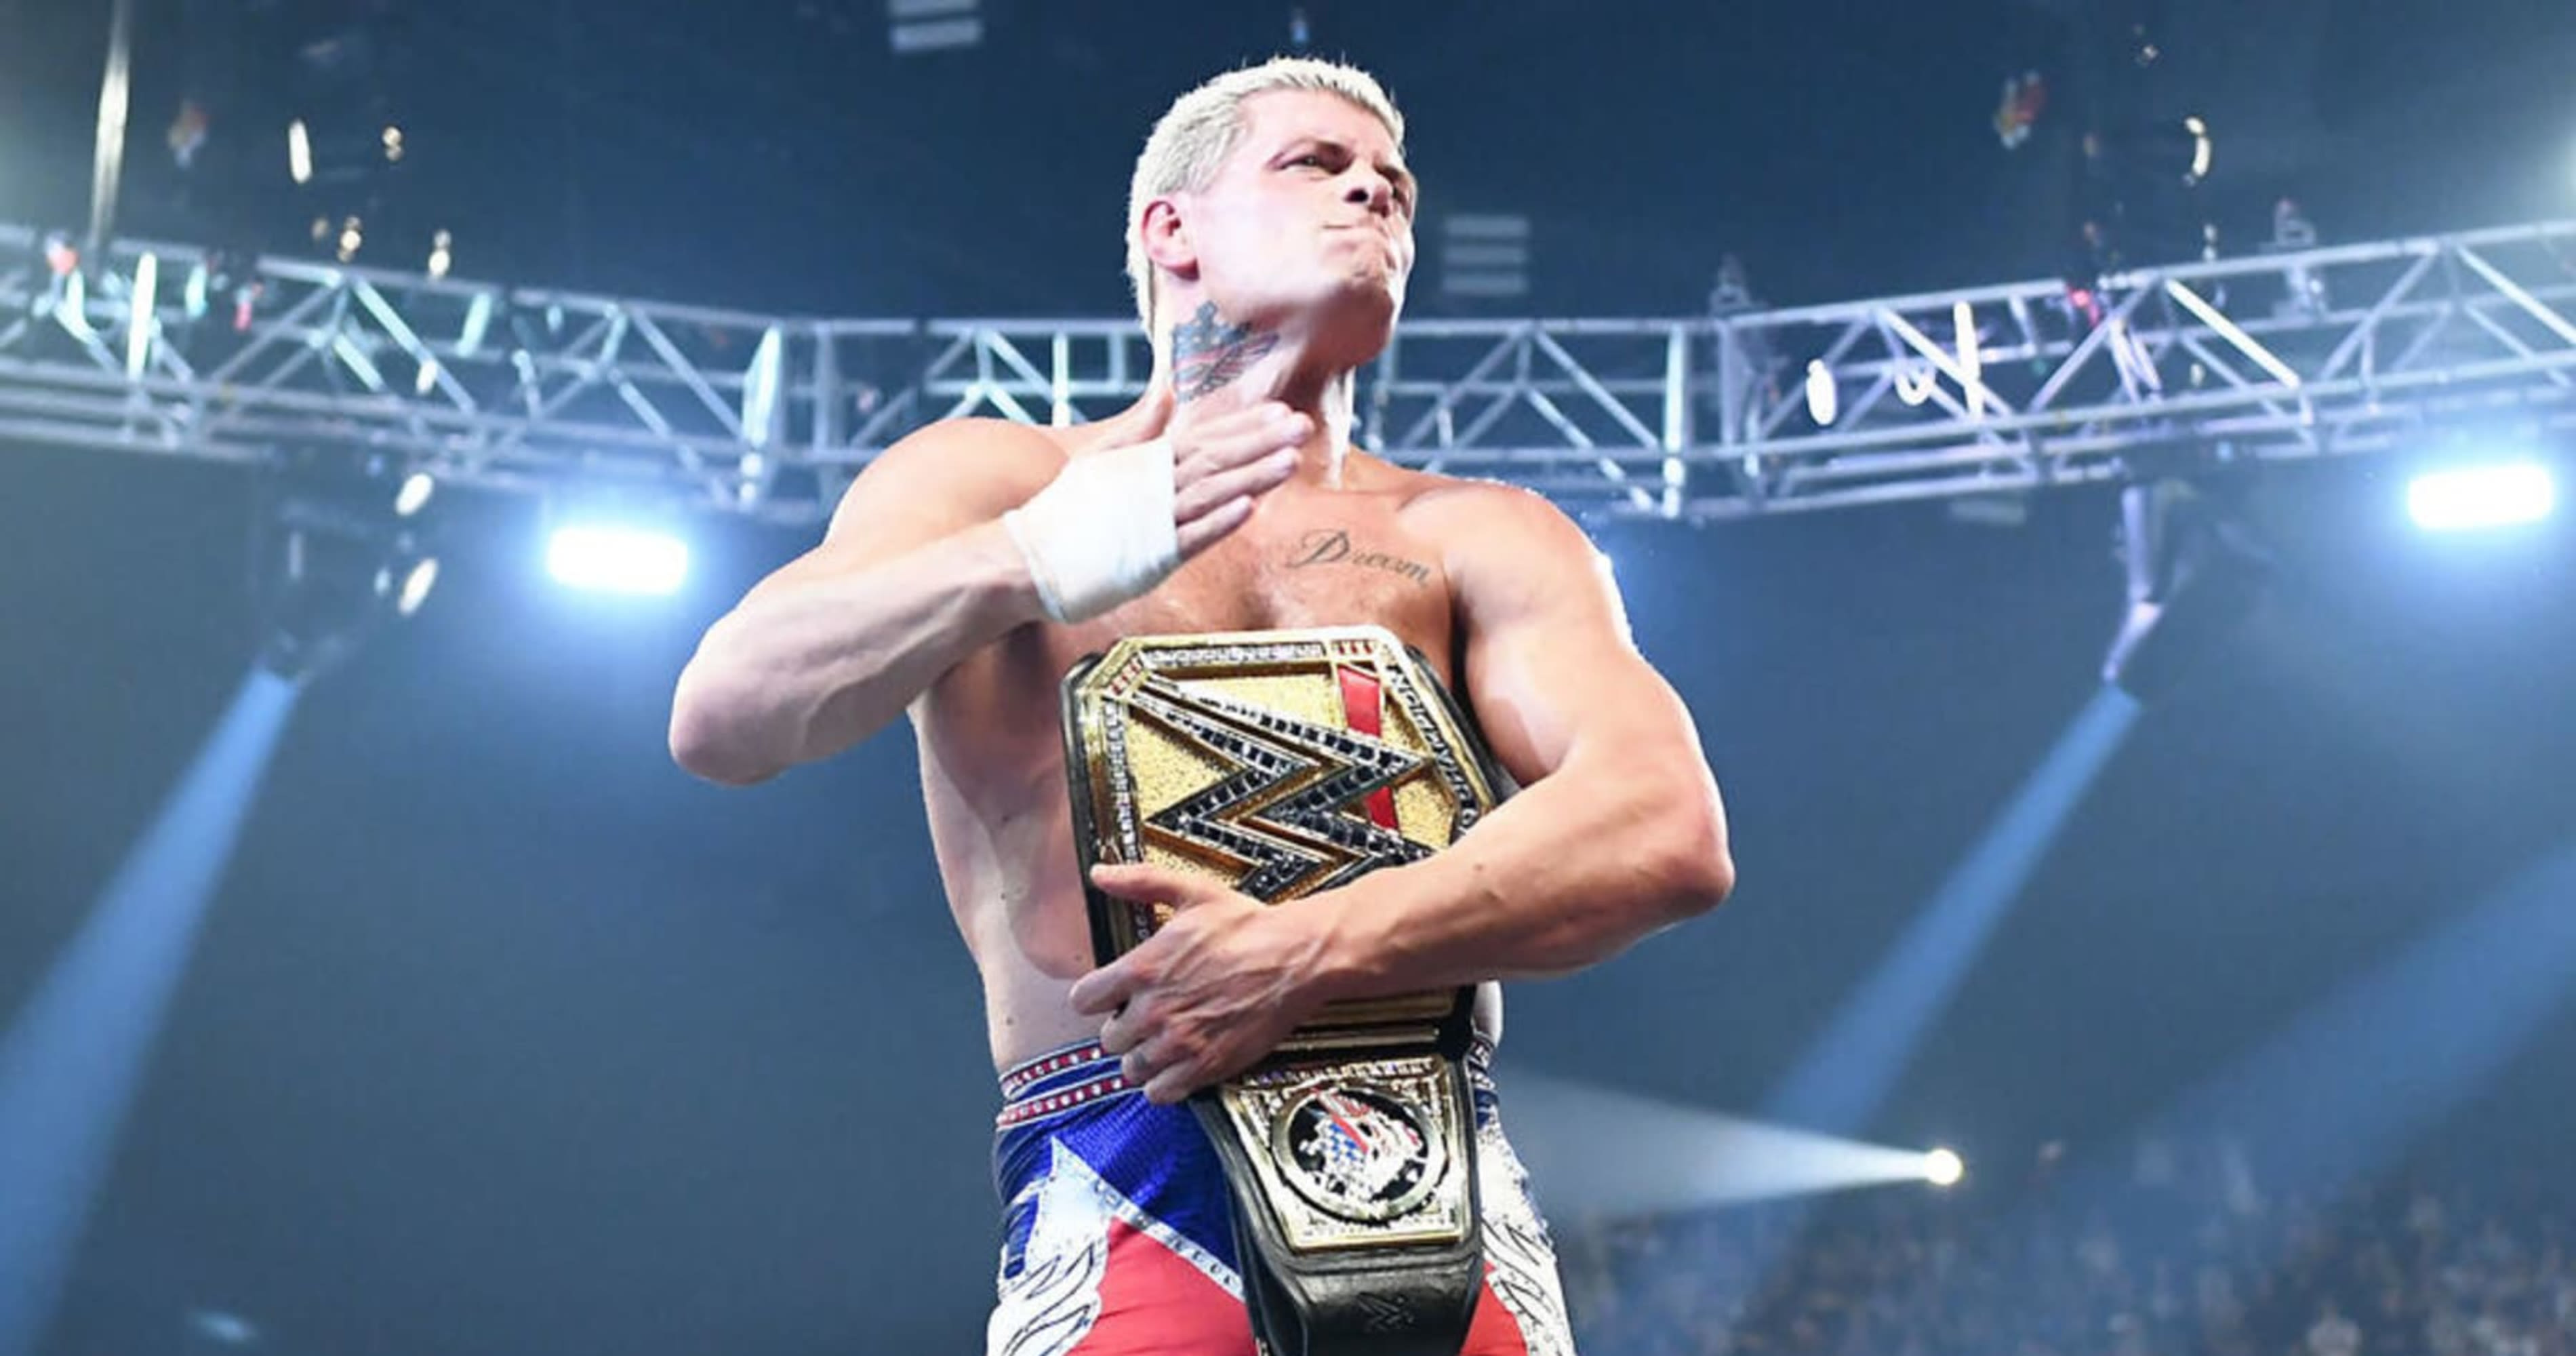 What's Next for Cody Rhodes and Damian Priest After WWE Backlash Wins?